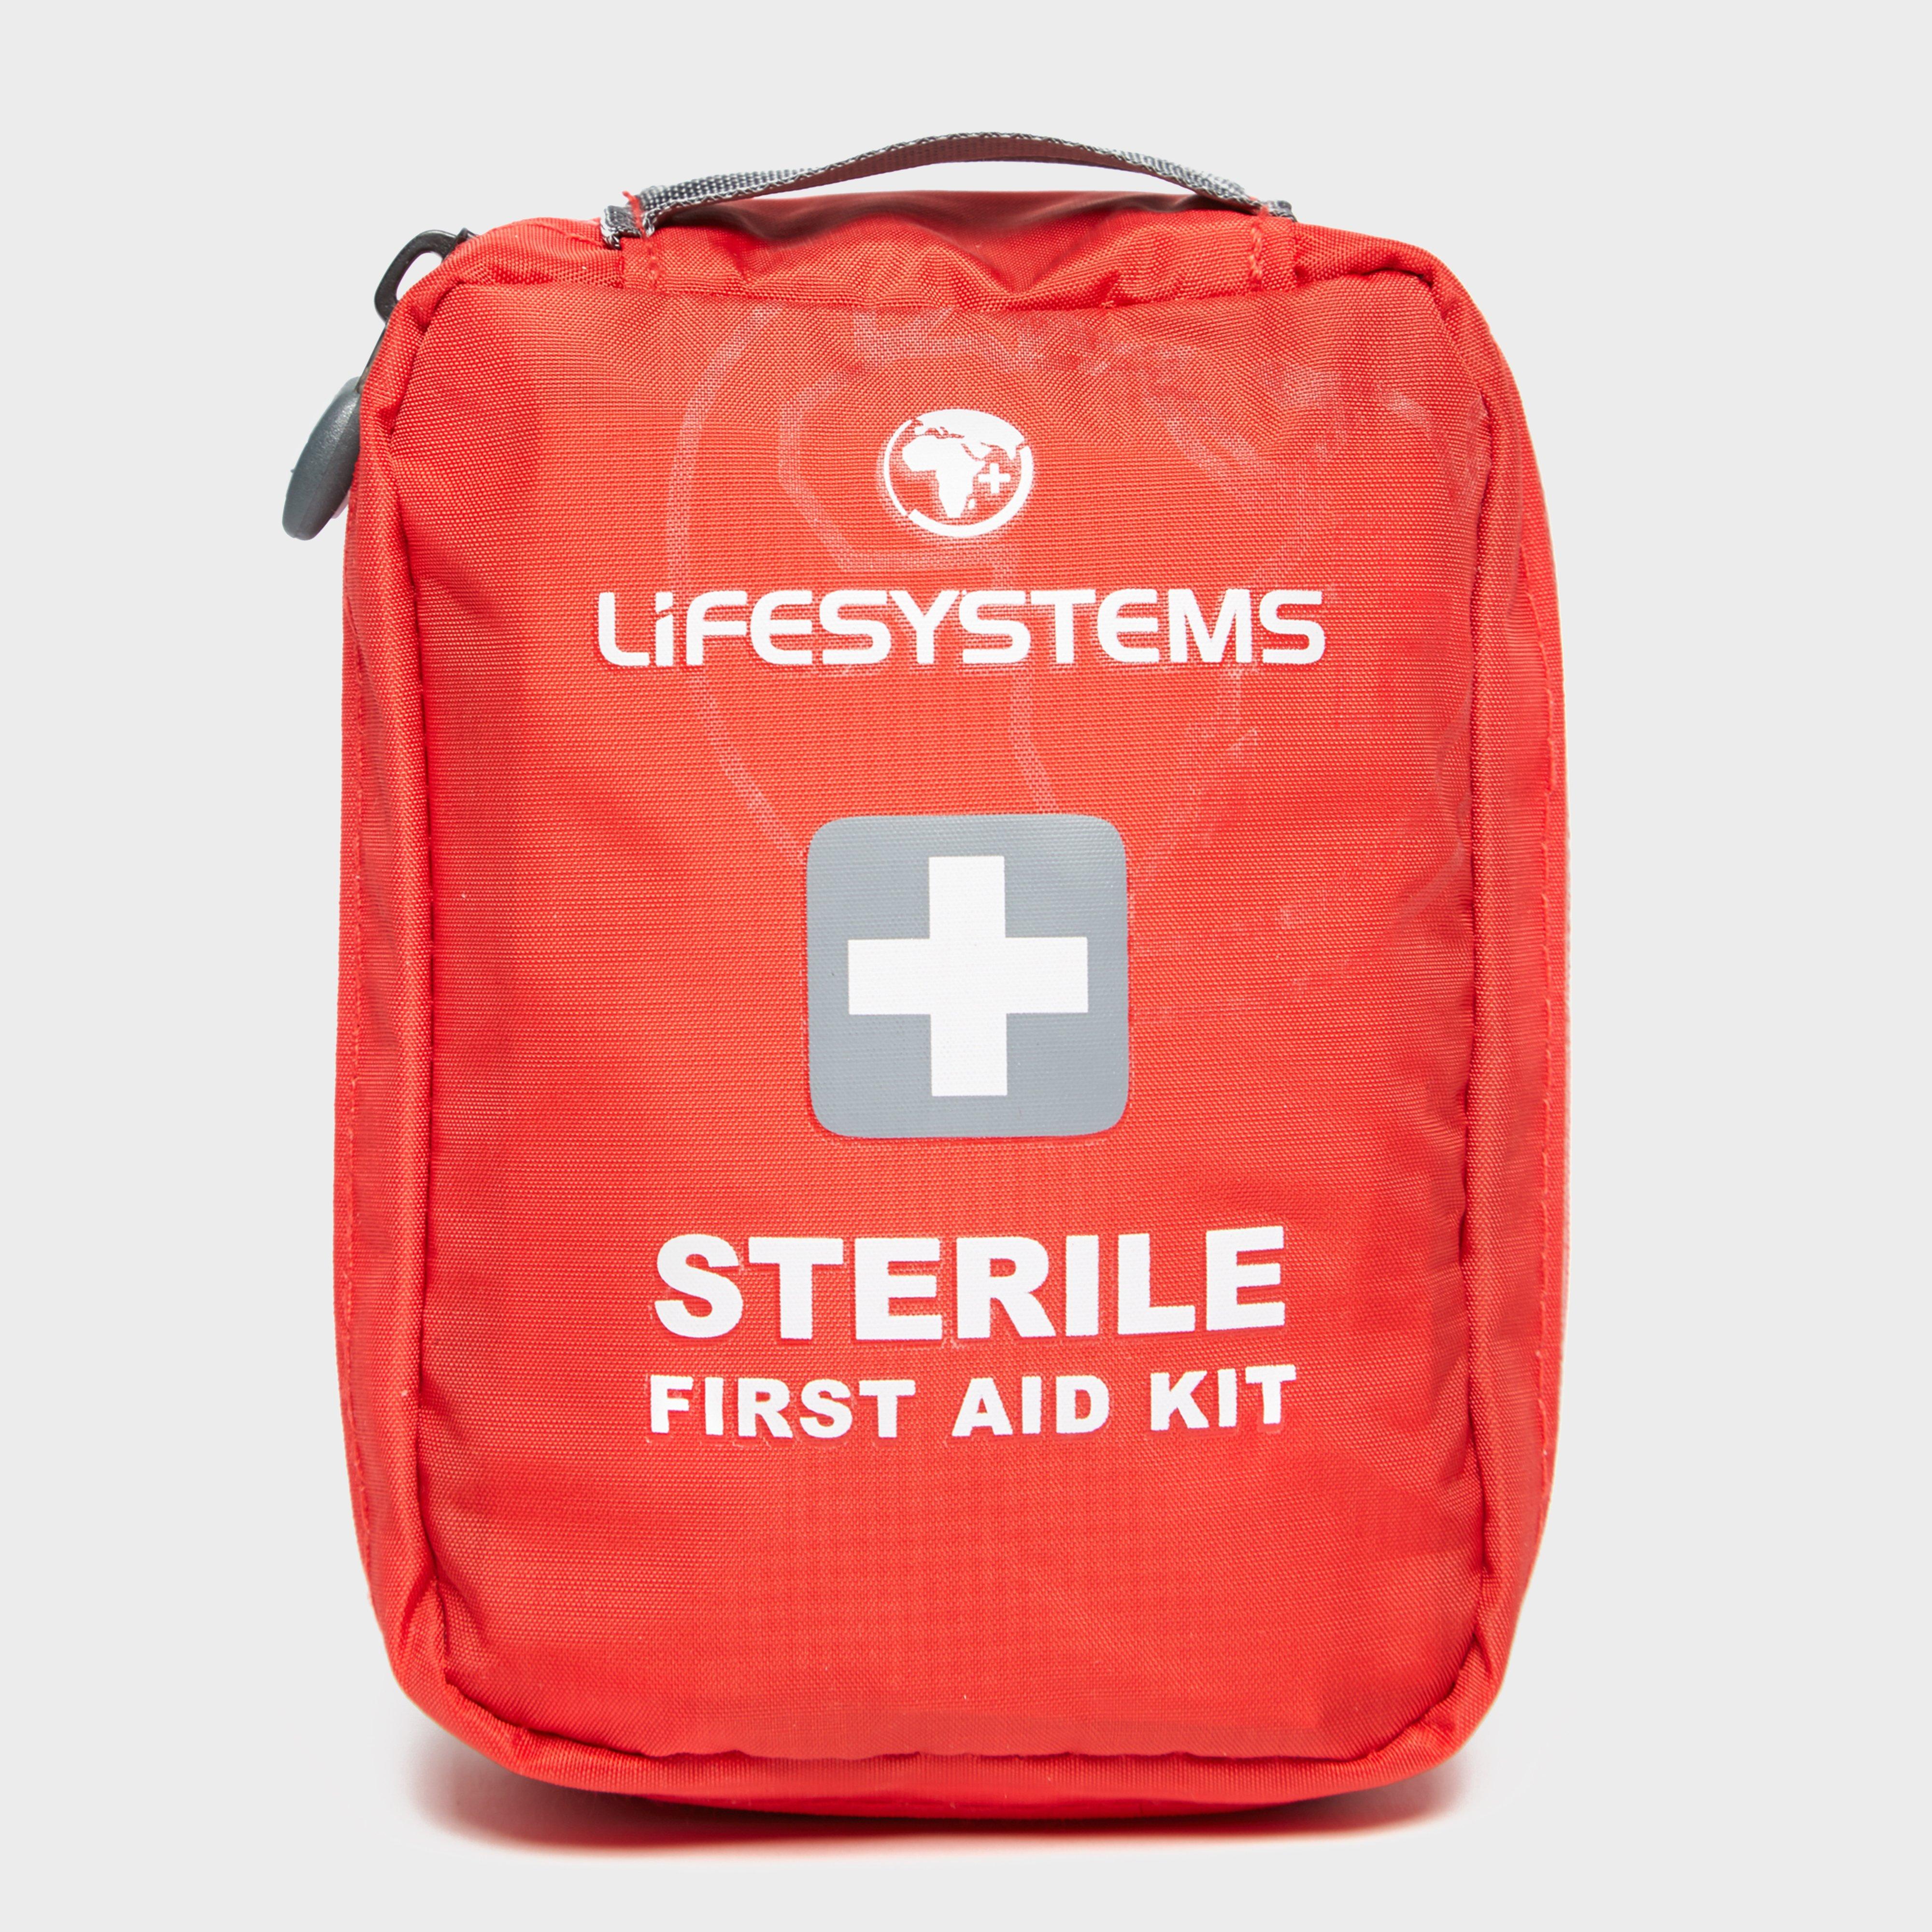 Lifesystems Sterile First Aid Kit - Red/aid  Red/aid